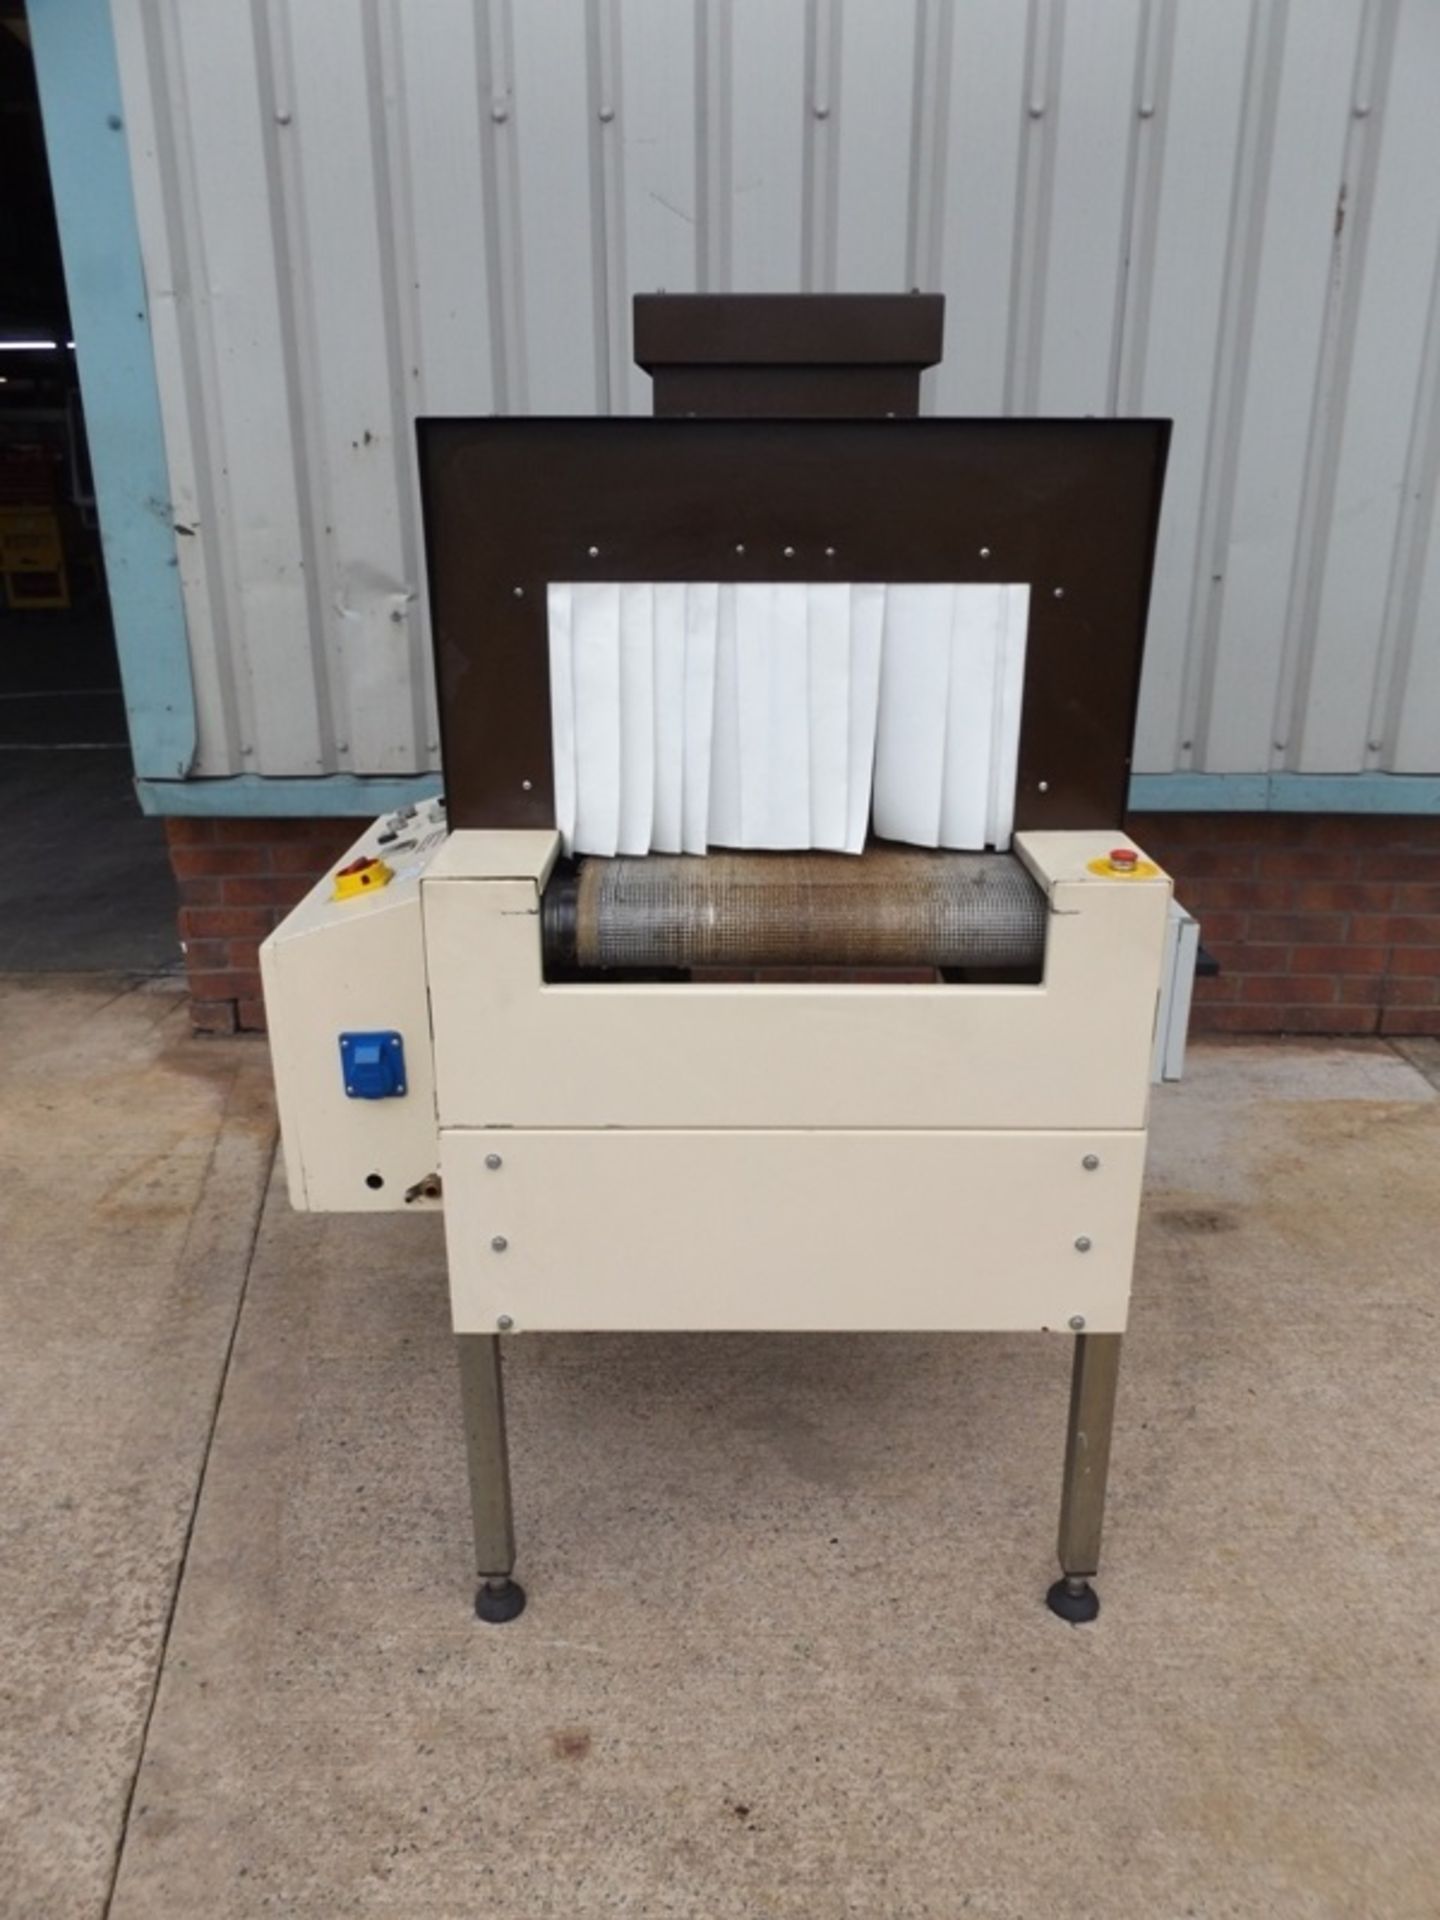 Burnley Packaging PE500/300 Semi automatic heat shrink sealer. Can be used with PVC and PE shrink - Image 2 of 6